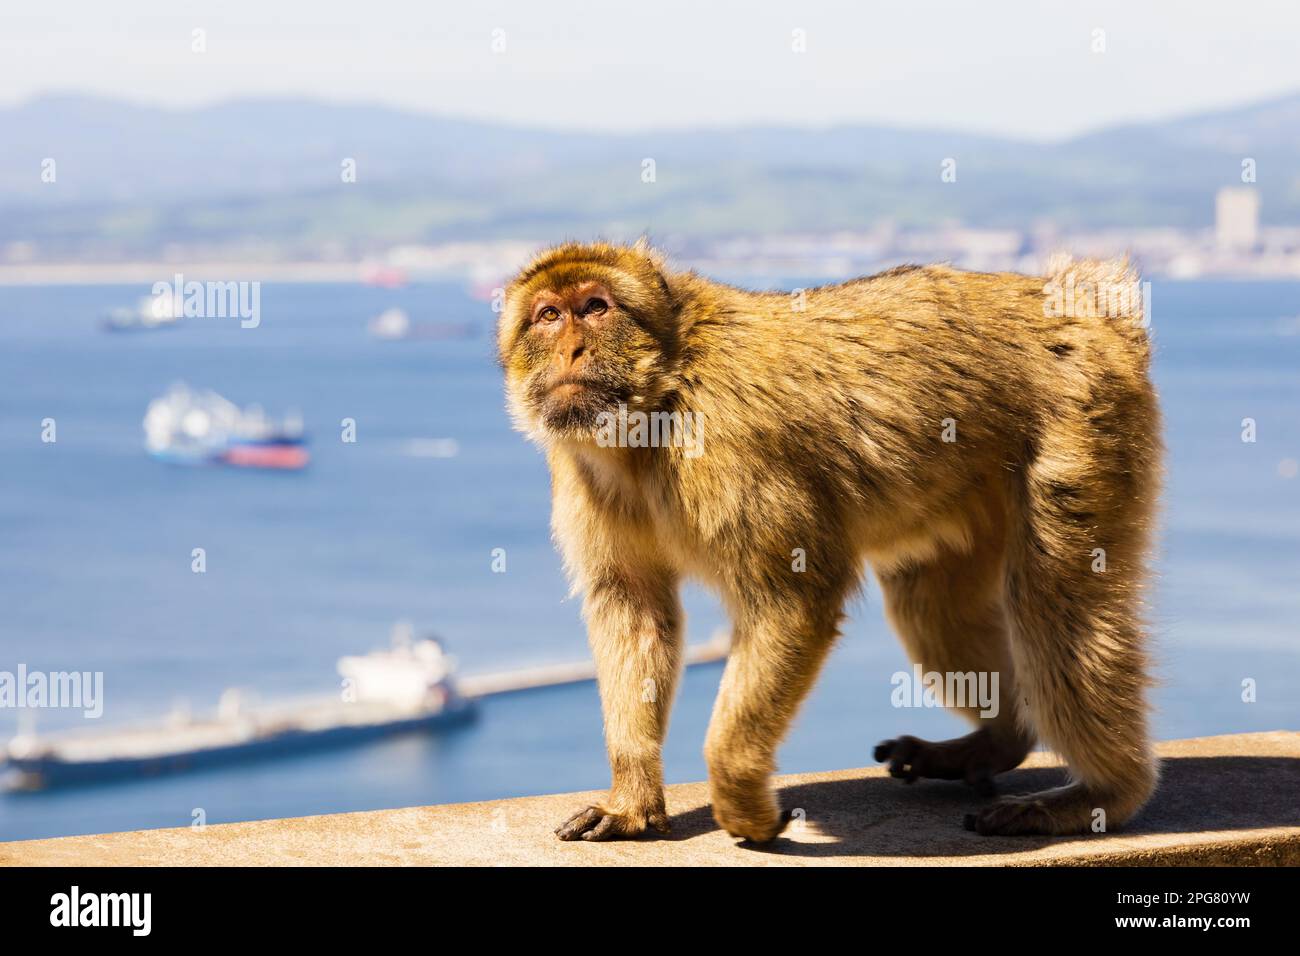 The famous Barbary Macaque of the British Overseas Territory of Gibraltar, the Rock of Gibraltar on the Iberian Peninsula. Stock Photo